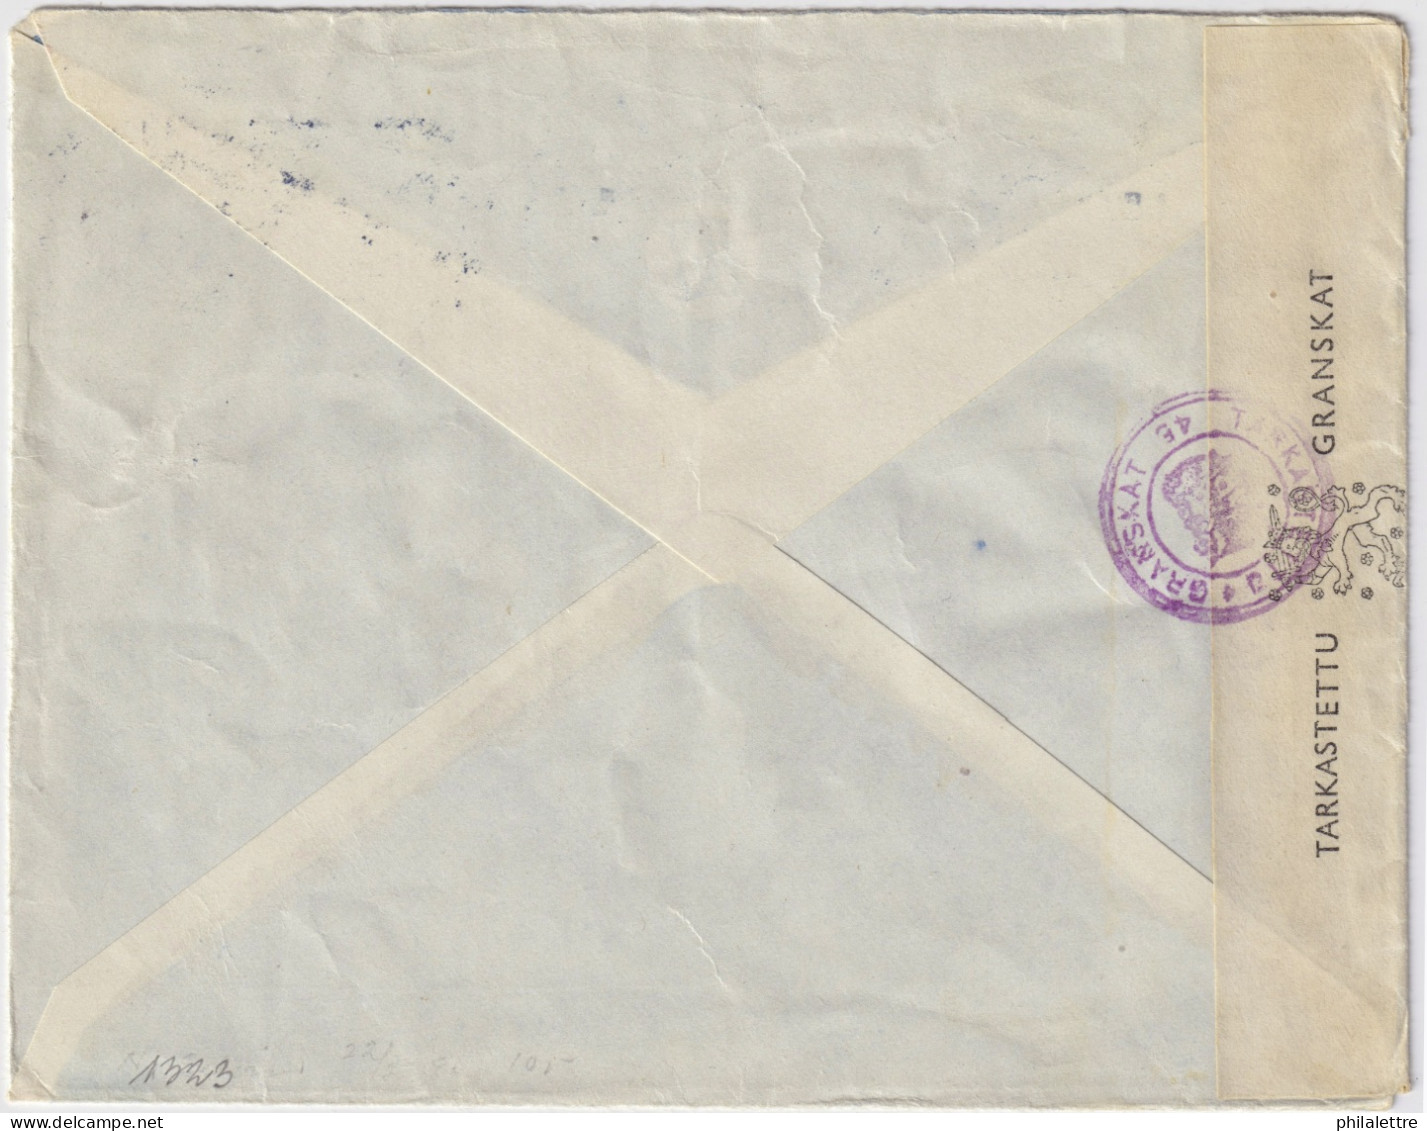 FINLAND - 1945 - Facit F258, F295 & F296 Red Cross (1942 & 45 Issues) On Censored Cover From HELSINKI To MOTALA, Sweden - Lettres & Documents